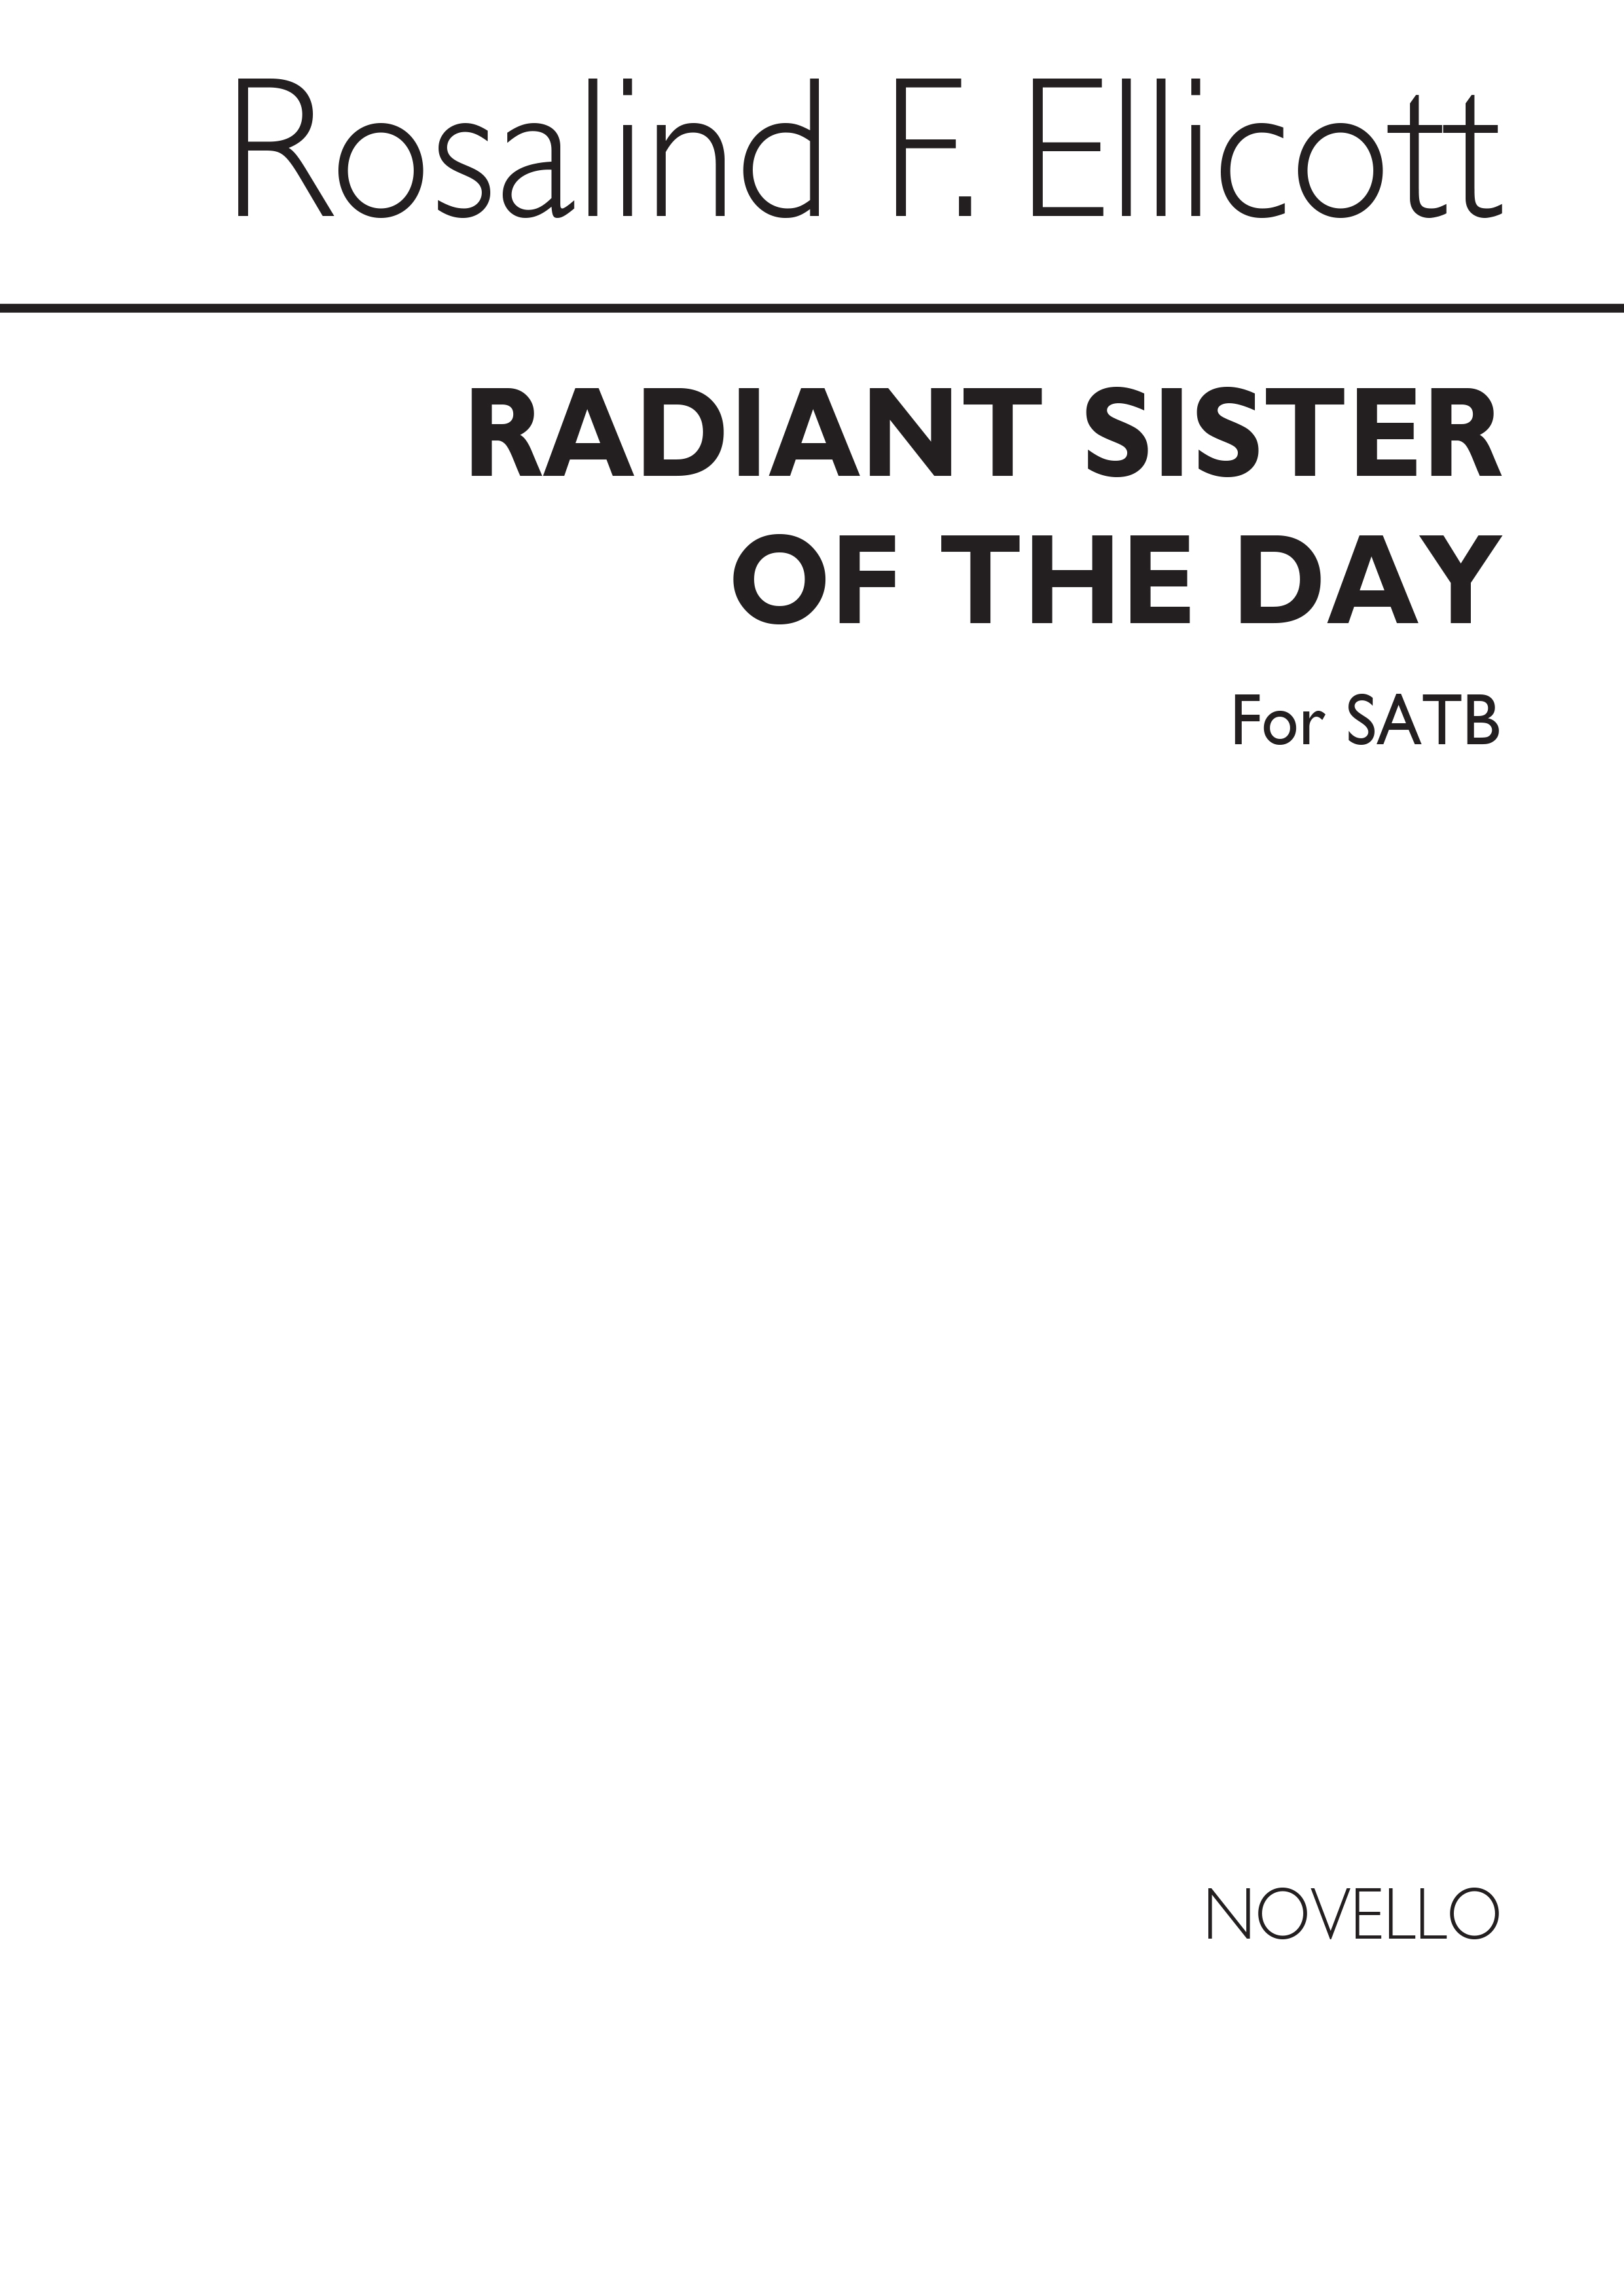 Rosalind Ellicott: Radiant Sister Of The Day - SATB